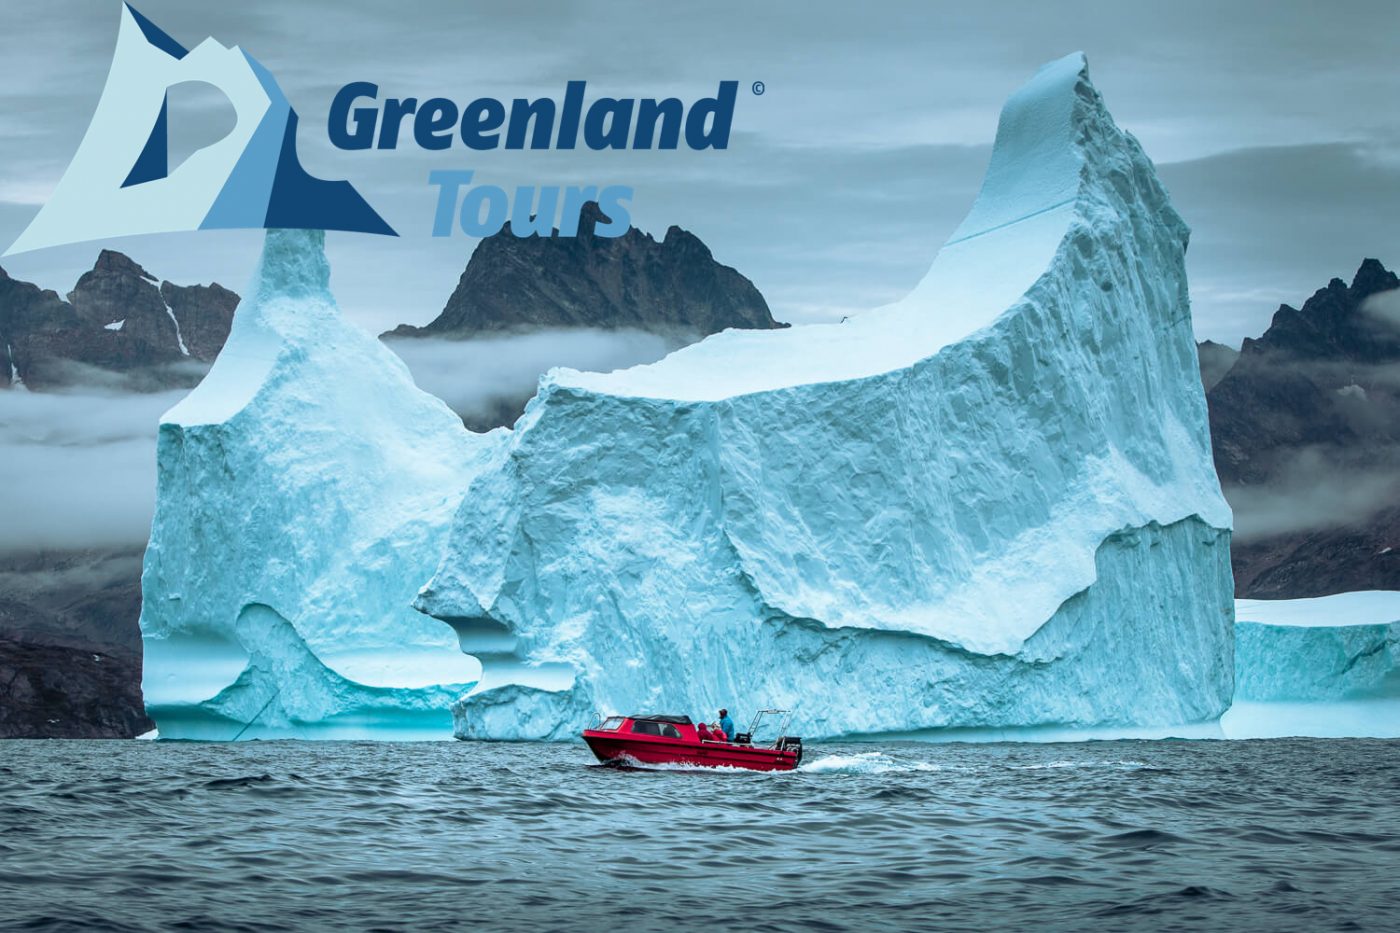 Greenland Tours: Great East